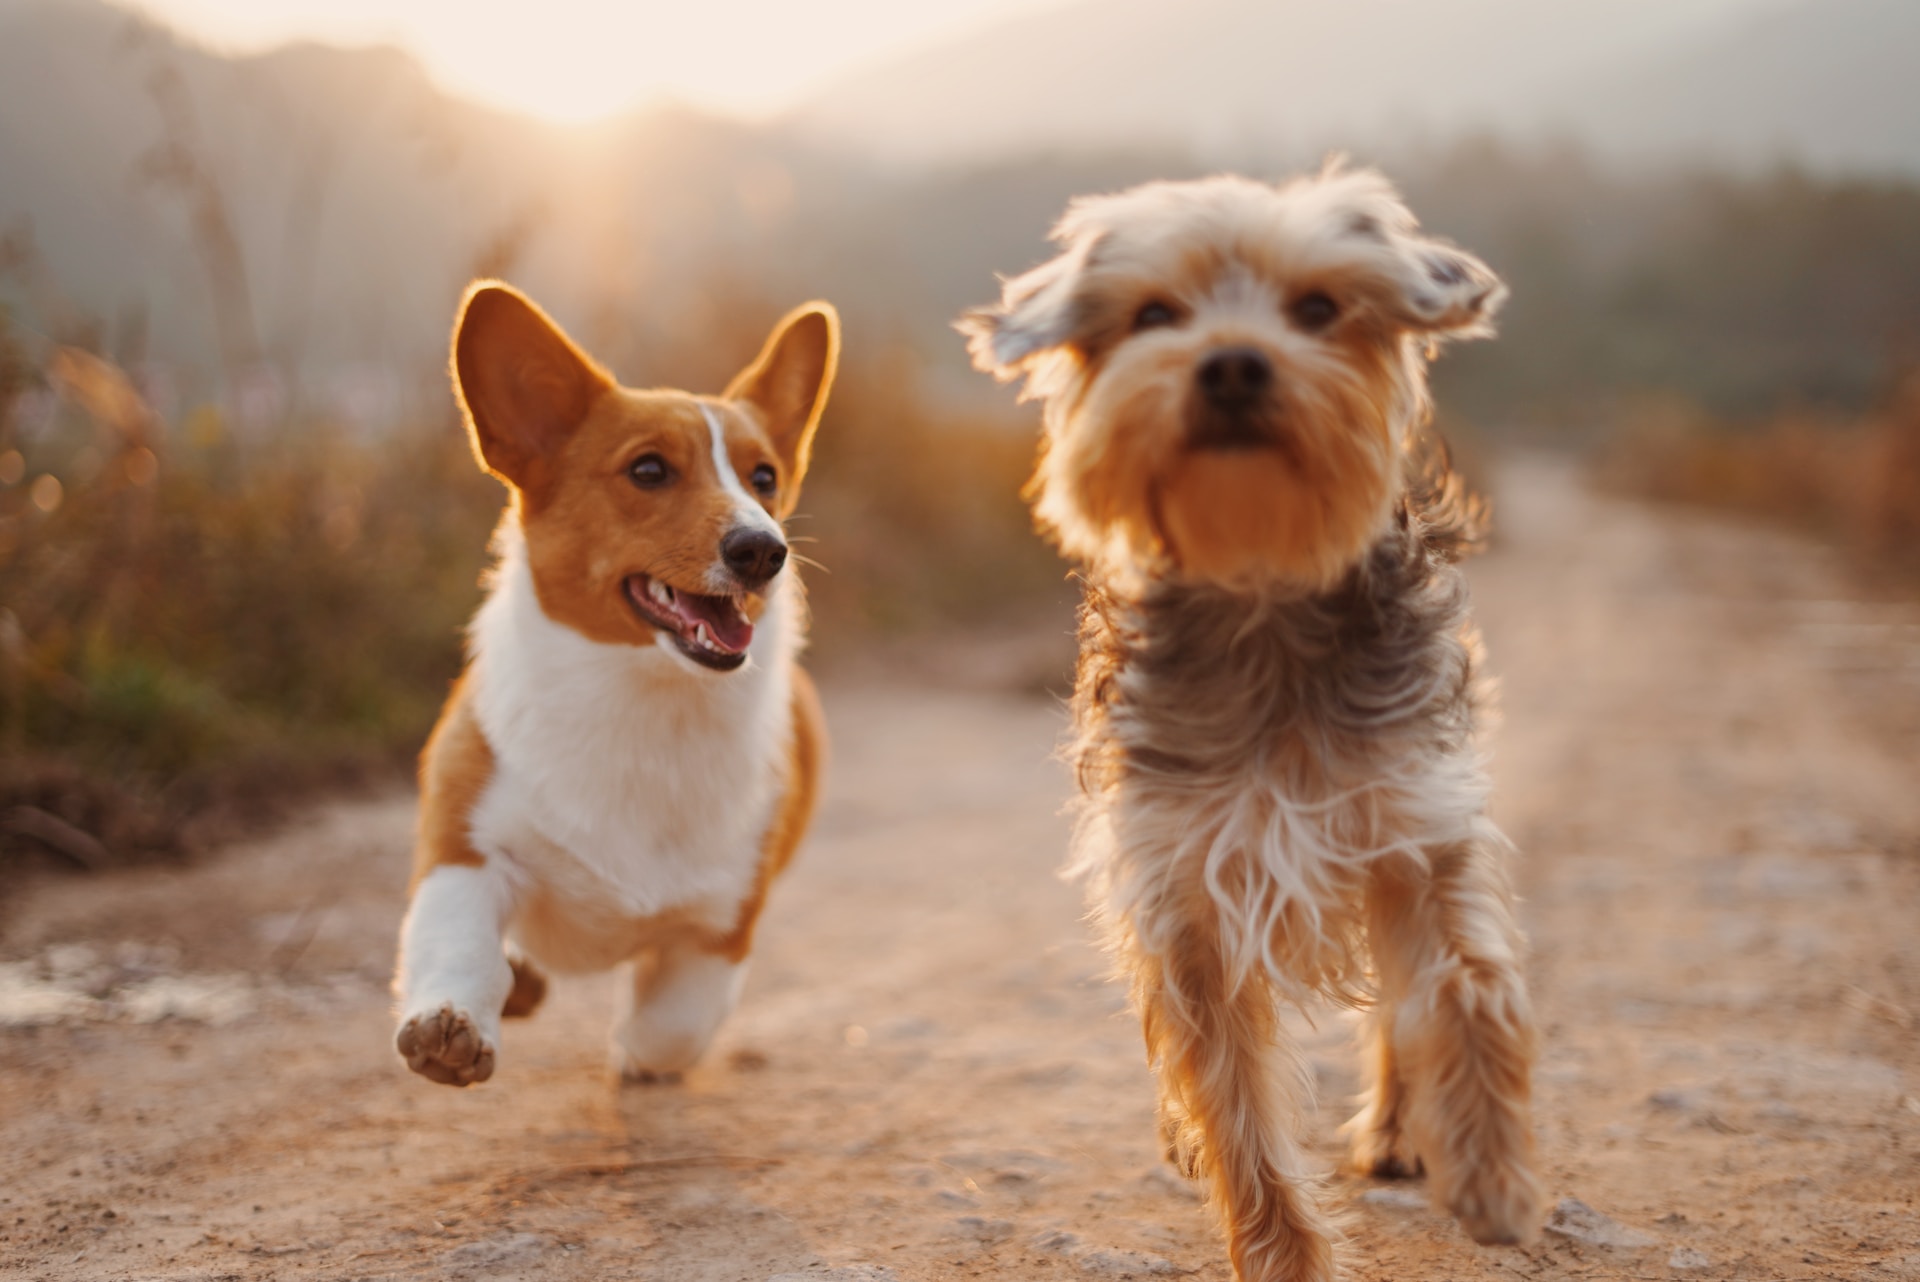 two dogs running down dirt path at sunset